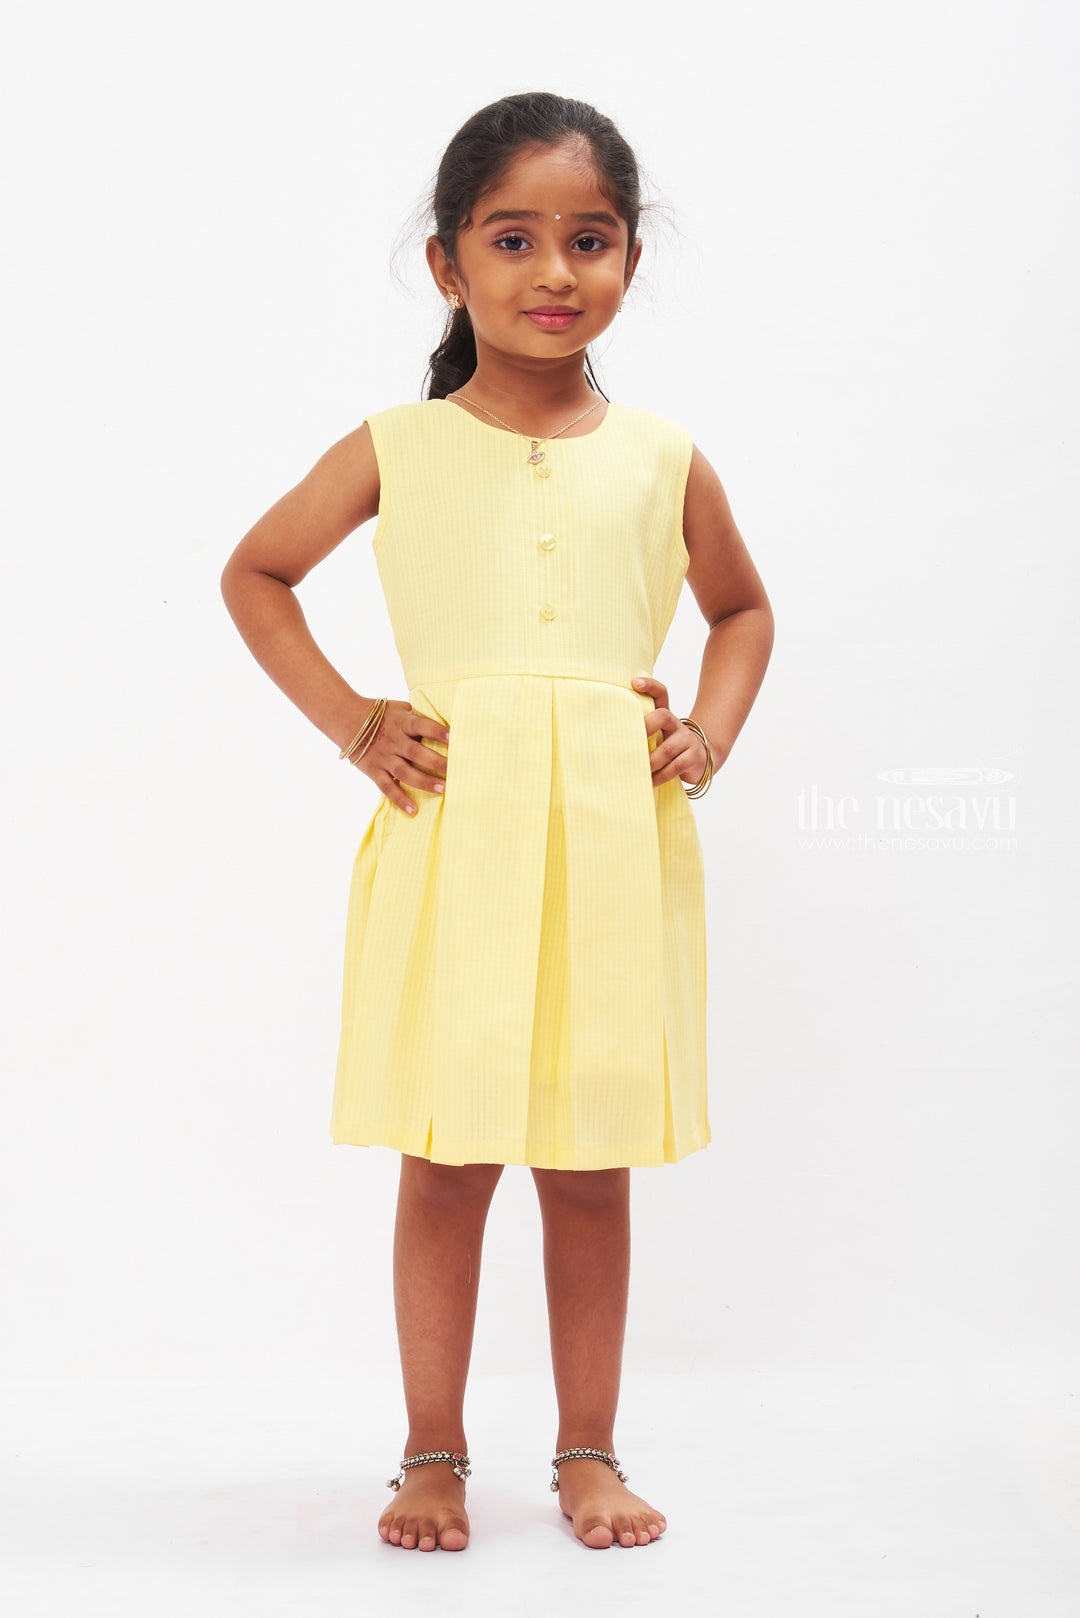 The Nesavu Girls Cotton Frock Sunny Delight Yellow Cotton Frock with Floral Jacket for Girls Nesavu Girls Yellow Dress with Colorful Floral Jacket | Cheerful Summer Wear | The Nesavu